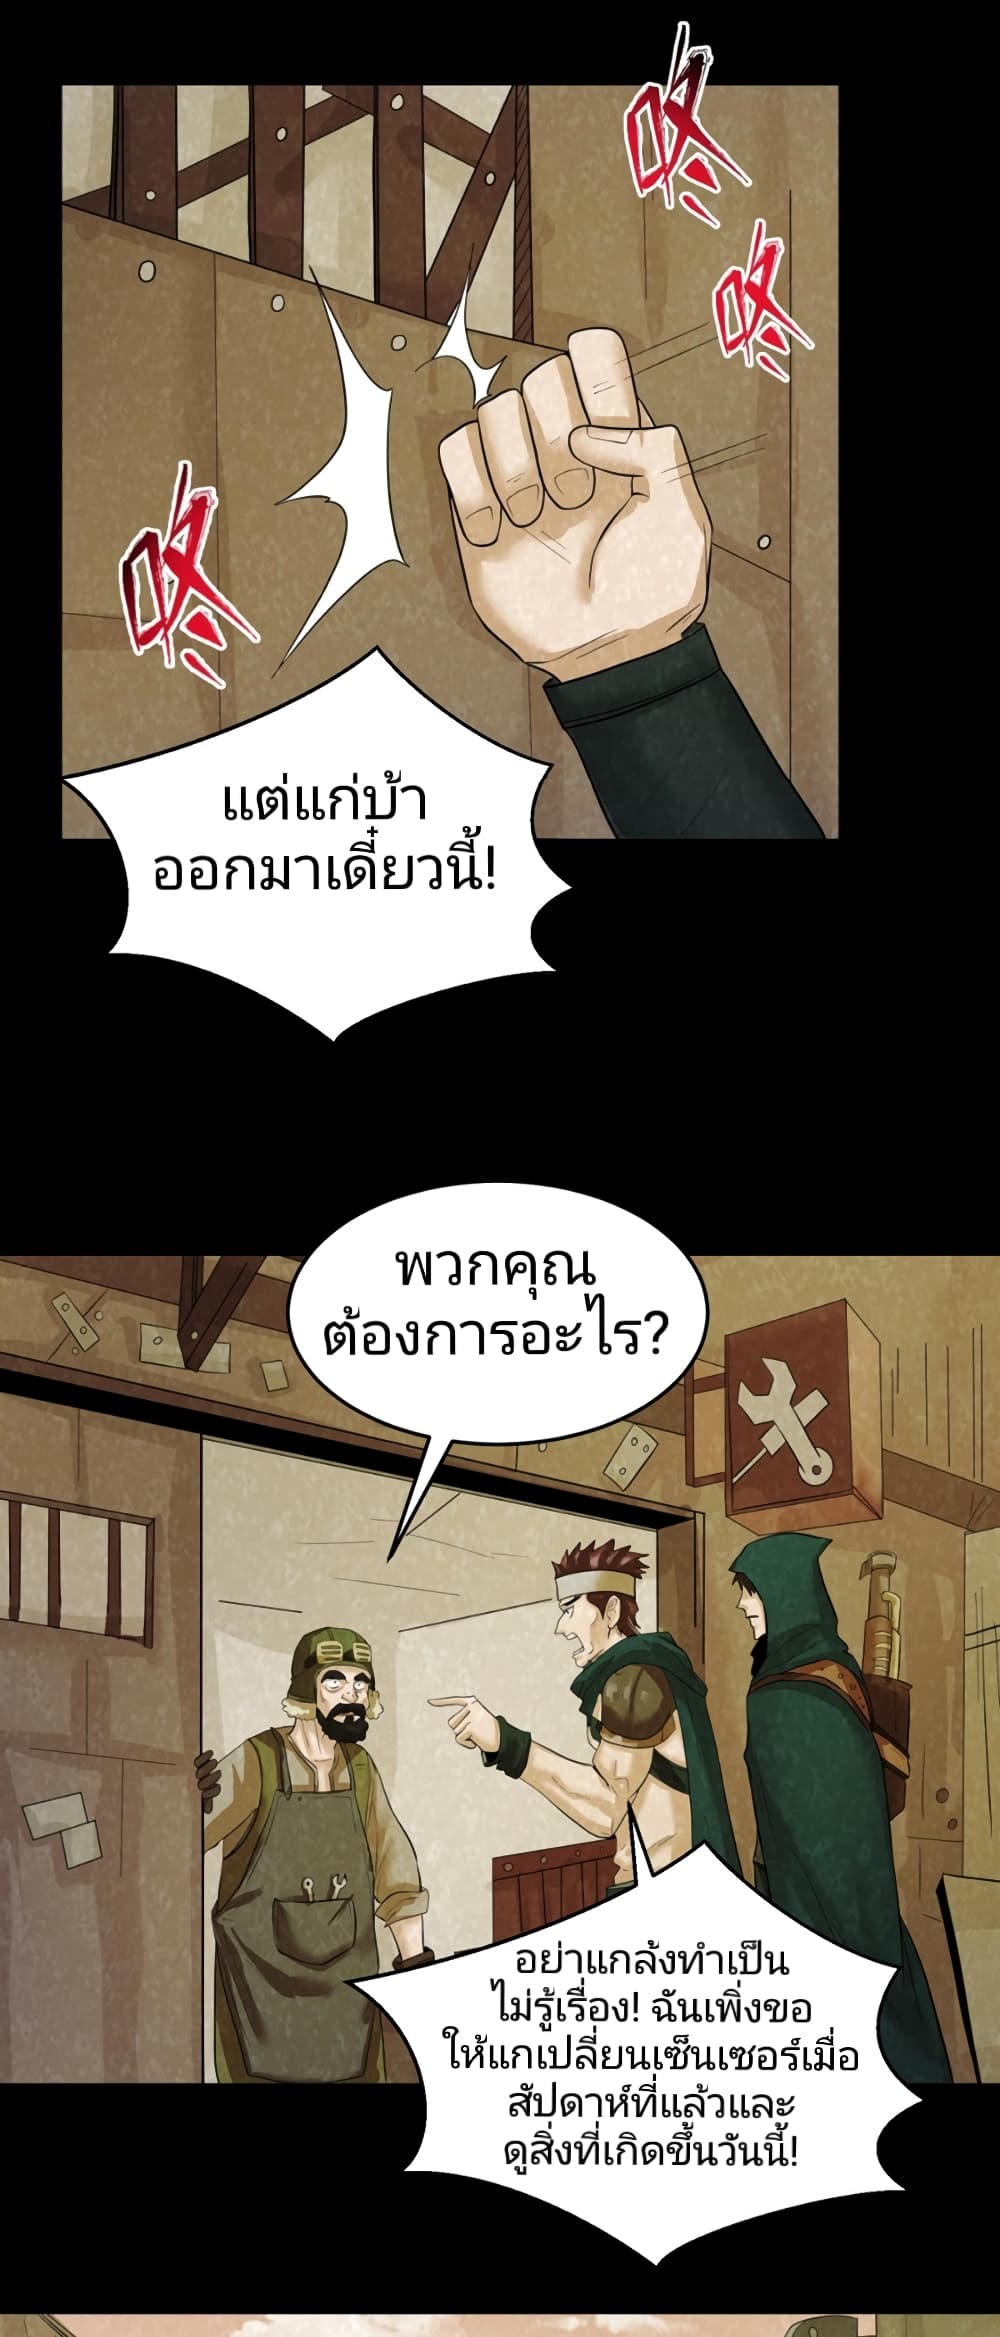 The Age of Ghost Spirits à¸à¸­à¸à¸à¸µà¹ 32 (7)